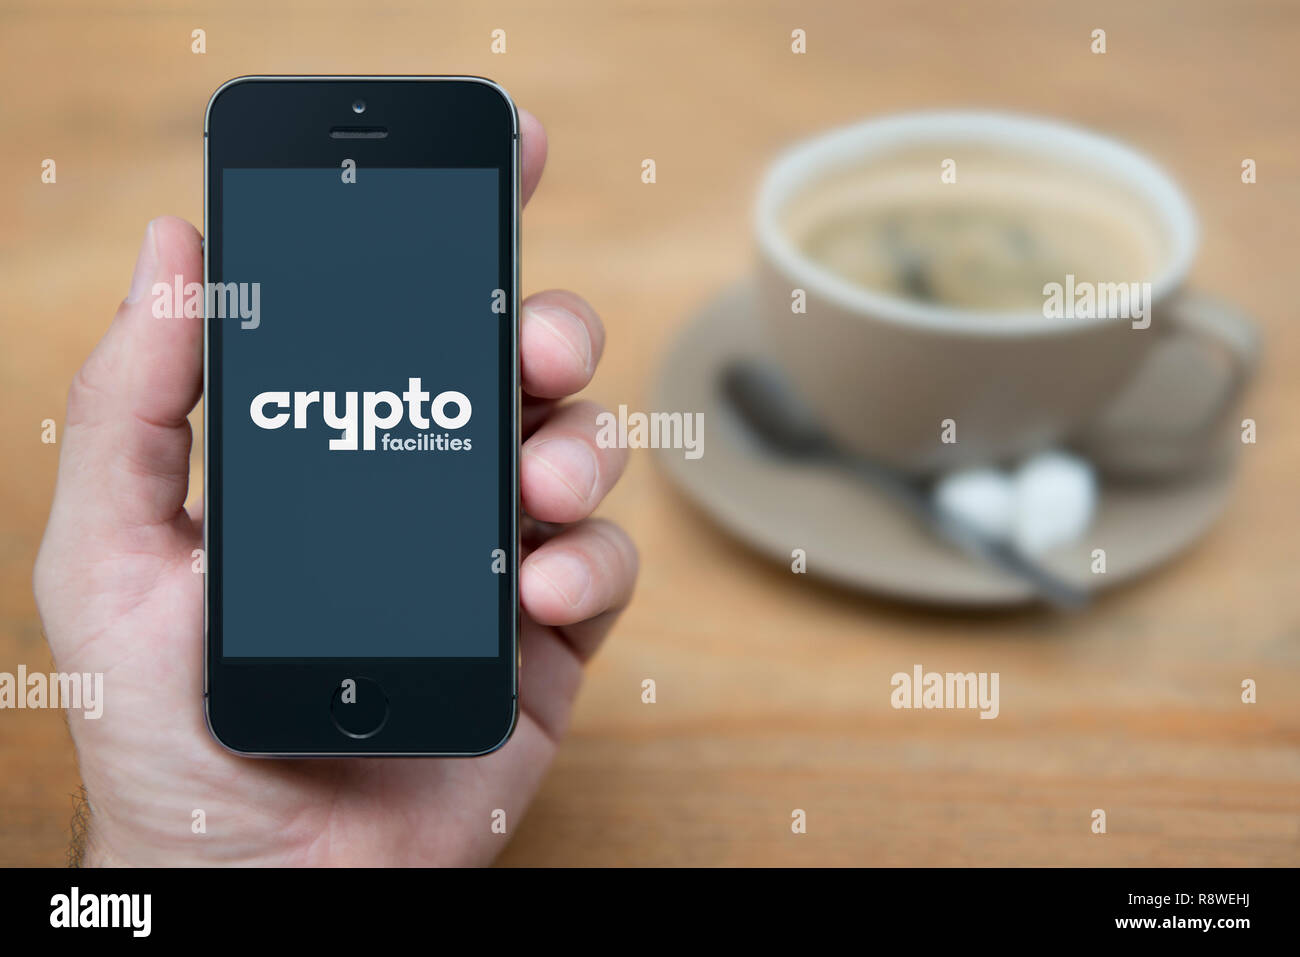 A man looks at his iPhone which displays the Crypto Facilities logo (Editorial use only). Stock Photo